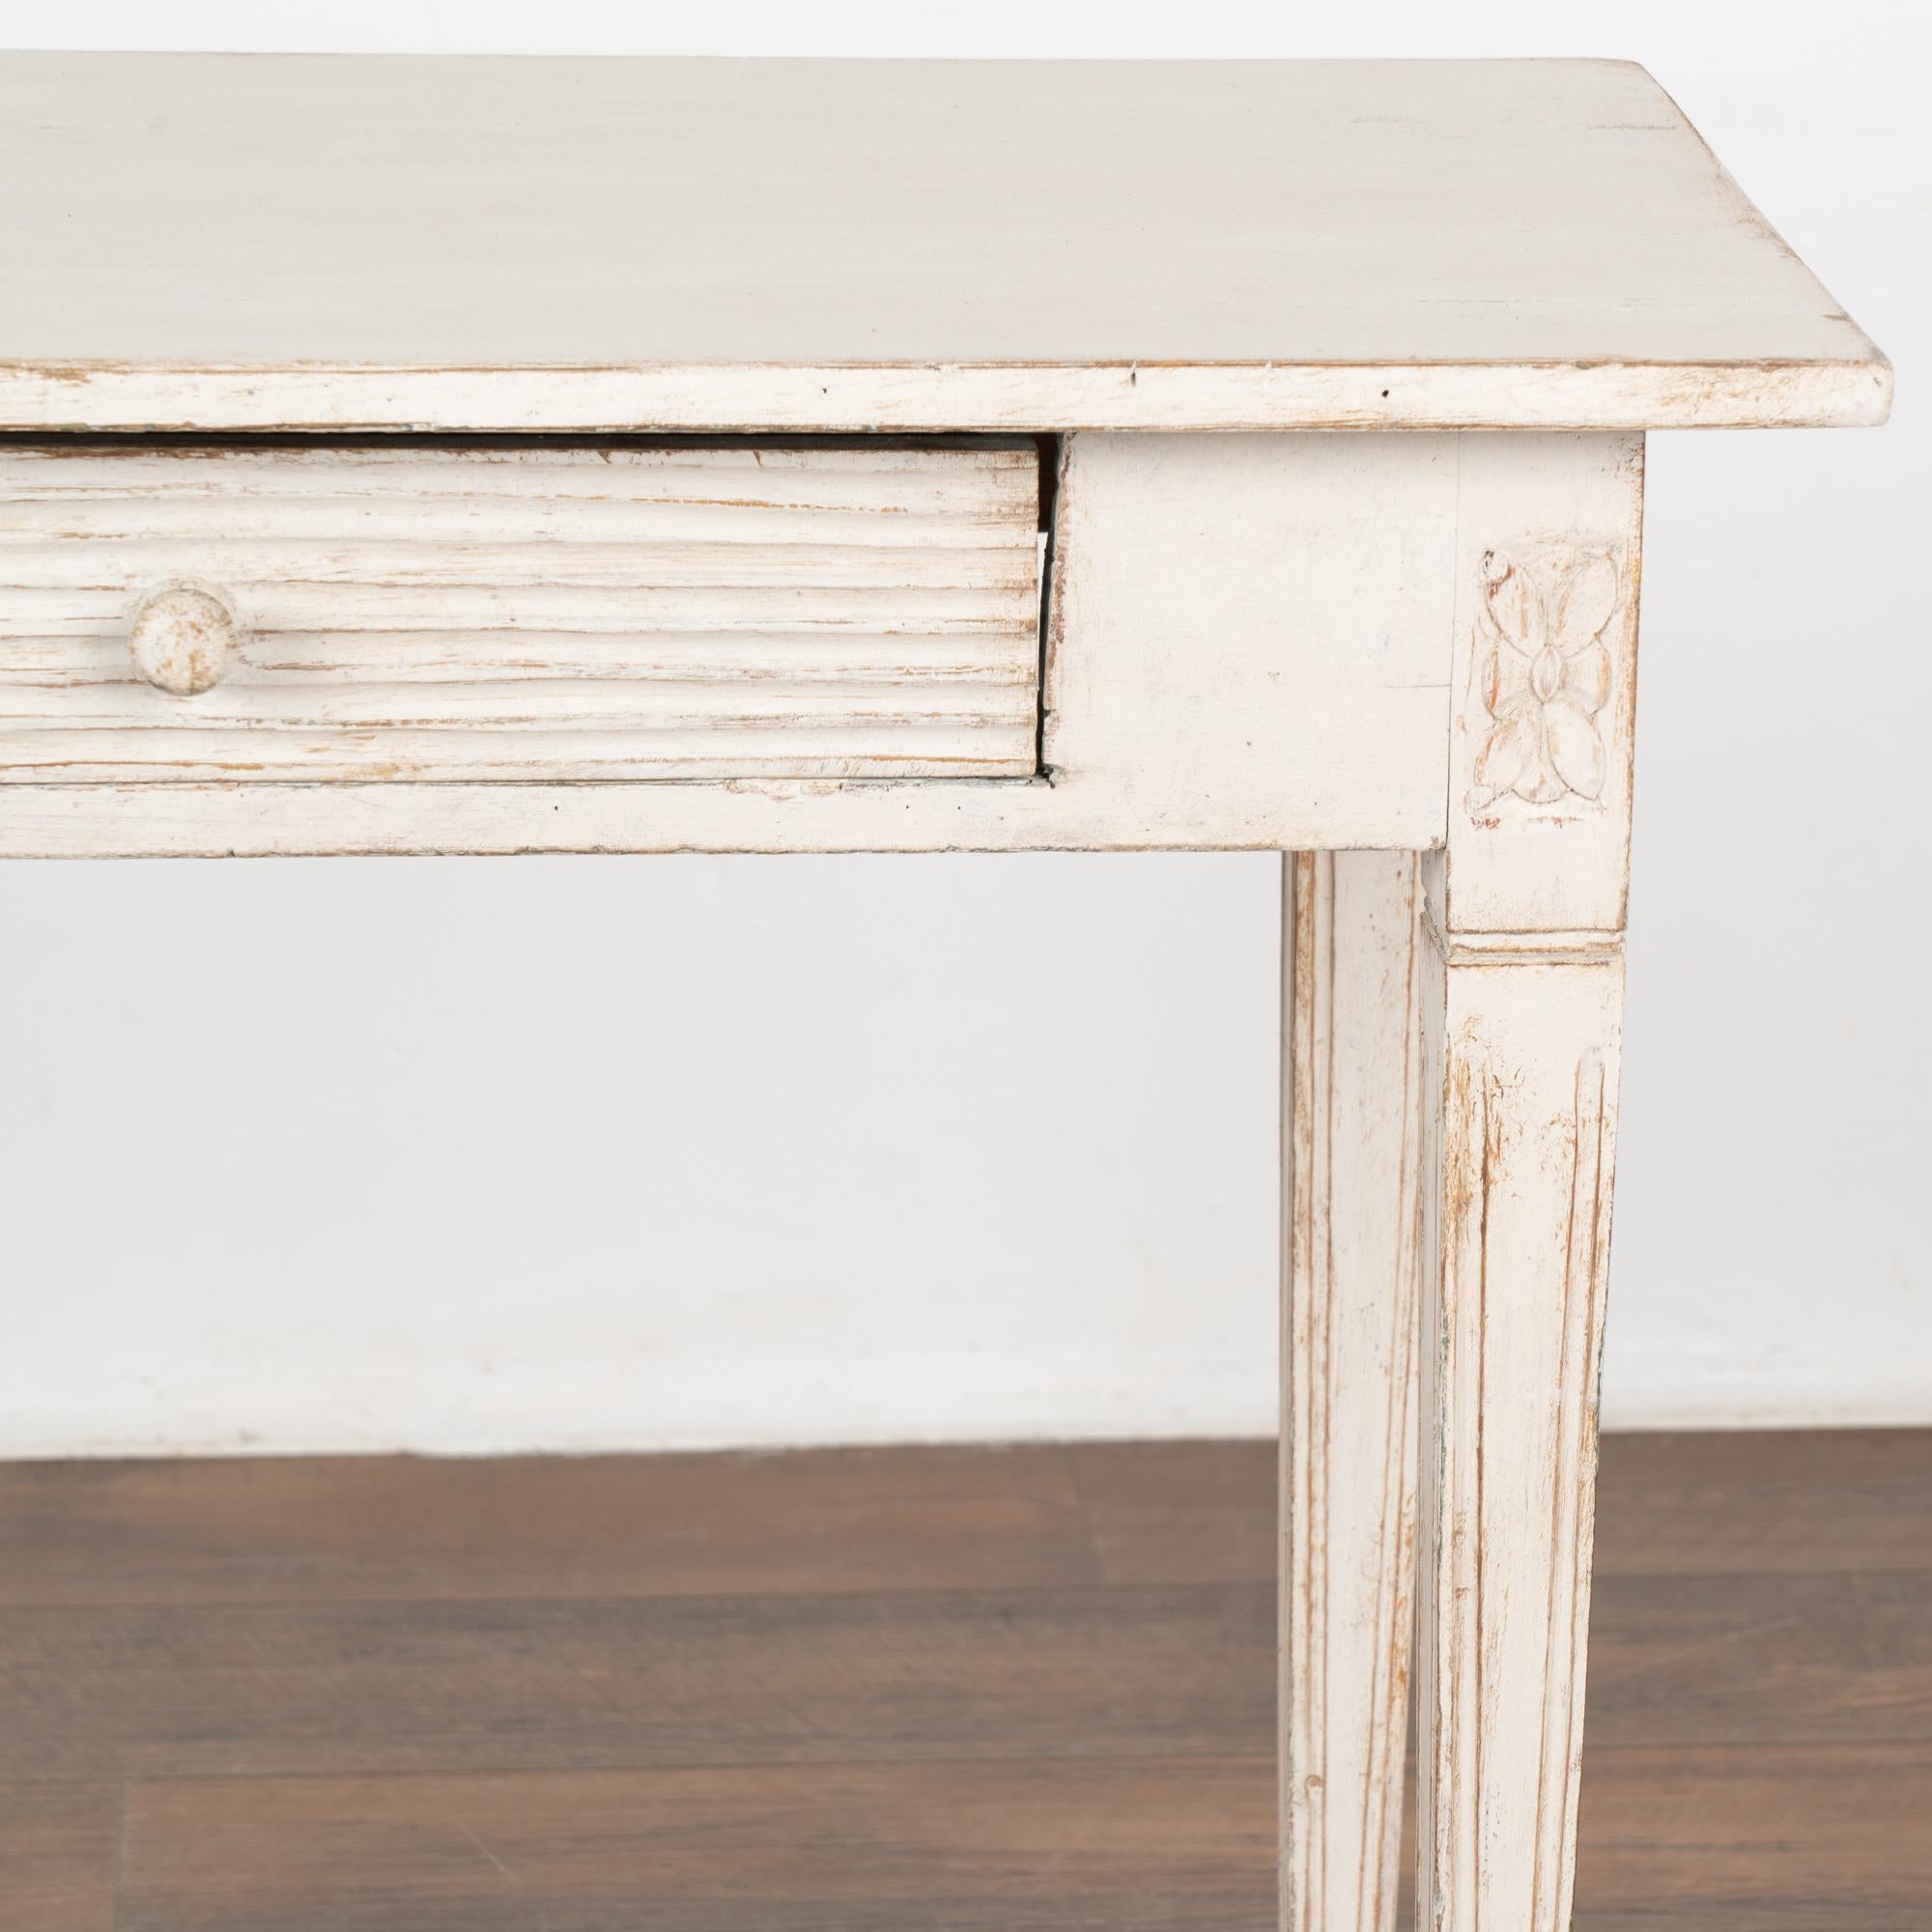 White Painted Side Table With Single Drawer, Sweden circa 1860-80 For Sale 1